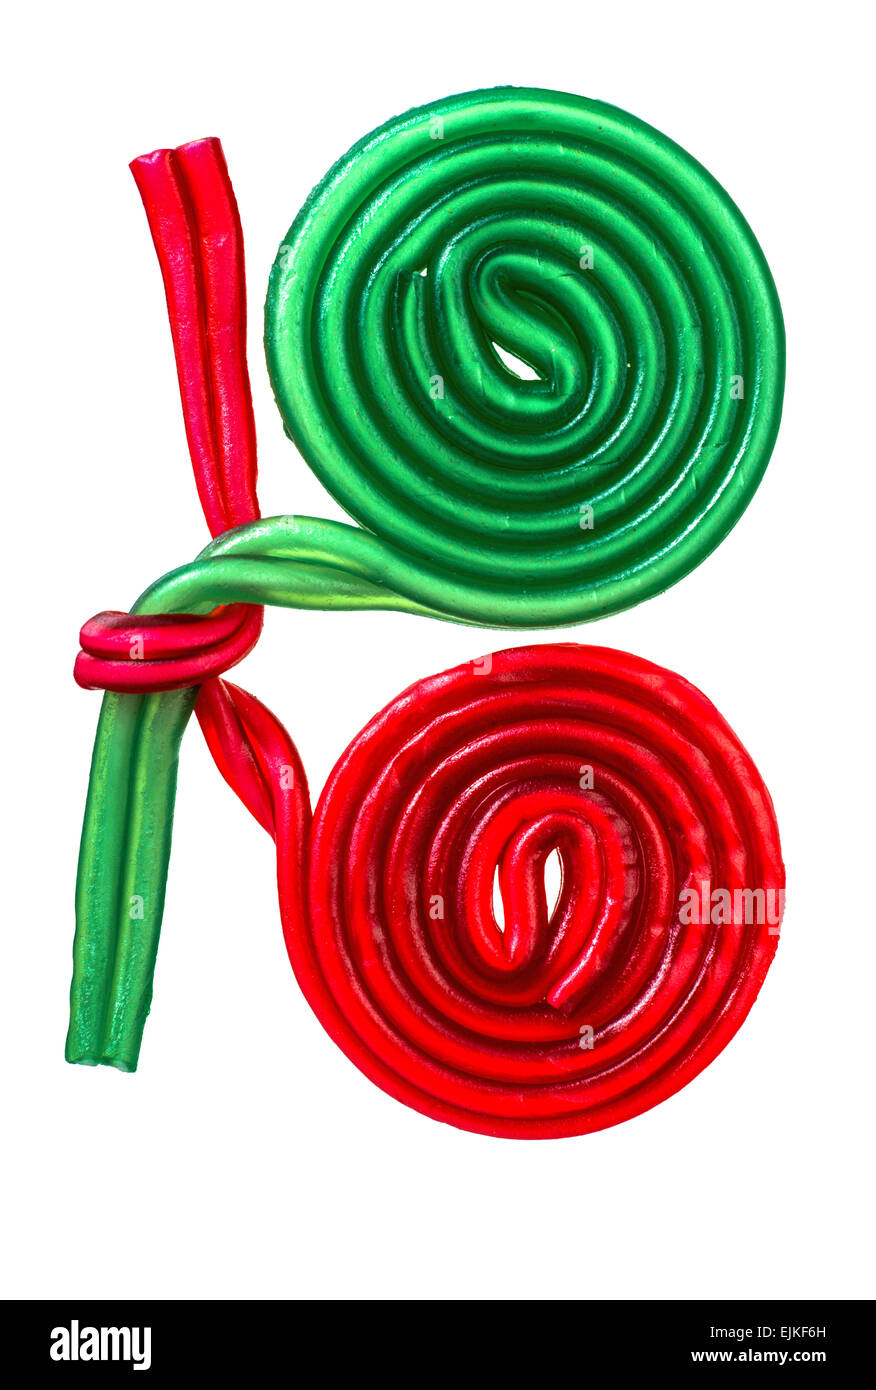 Green and red fruit gum snails Stock Photo